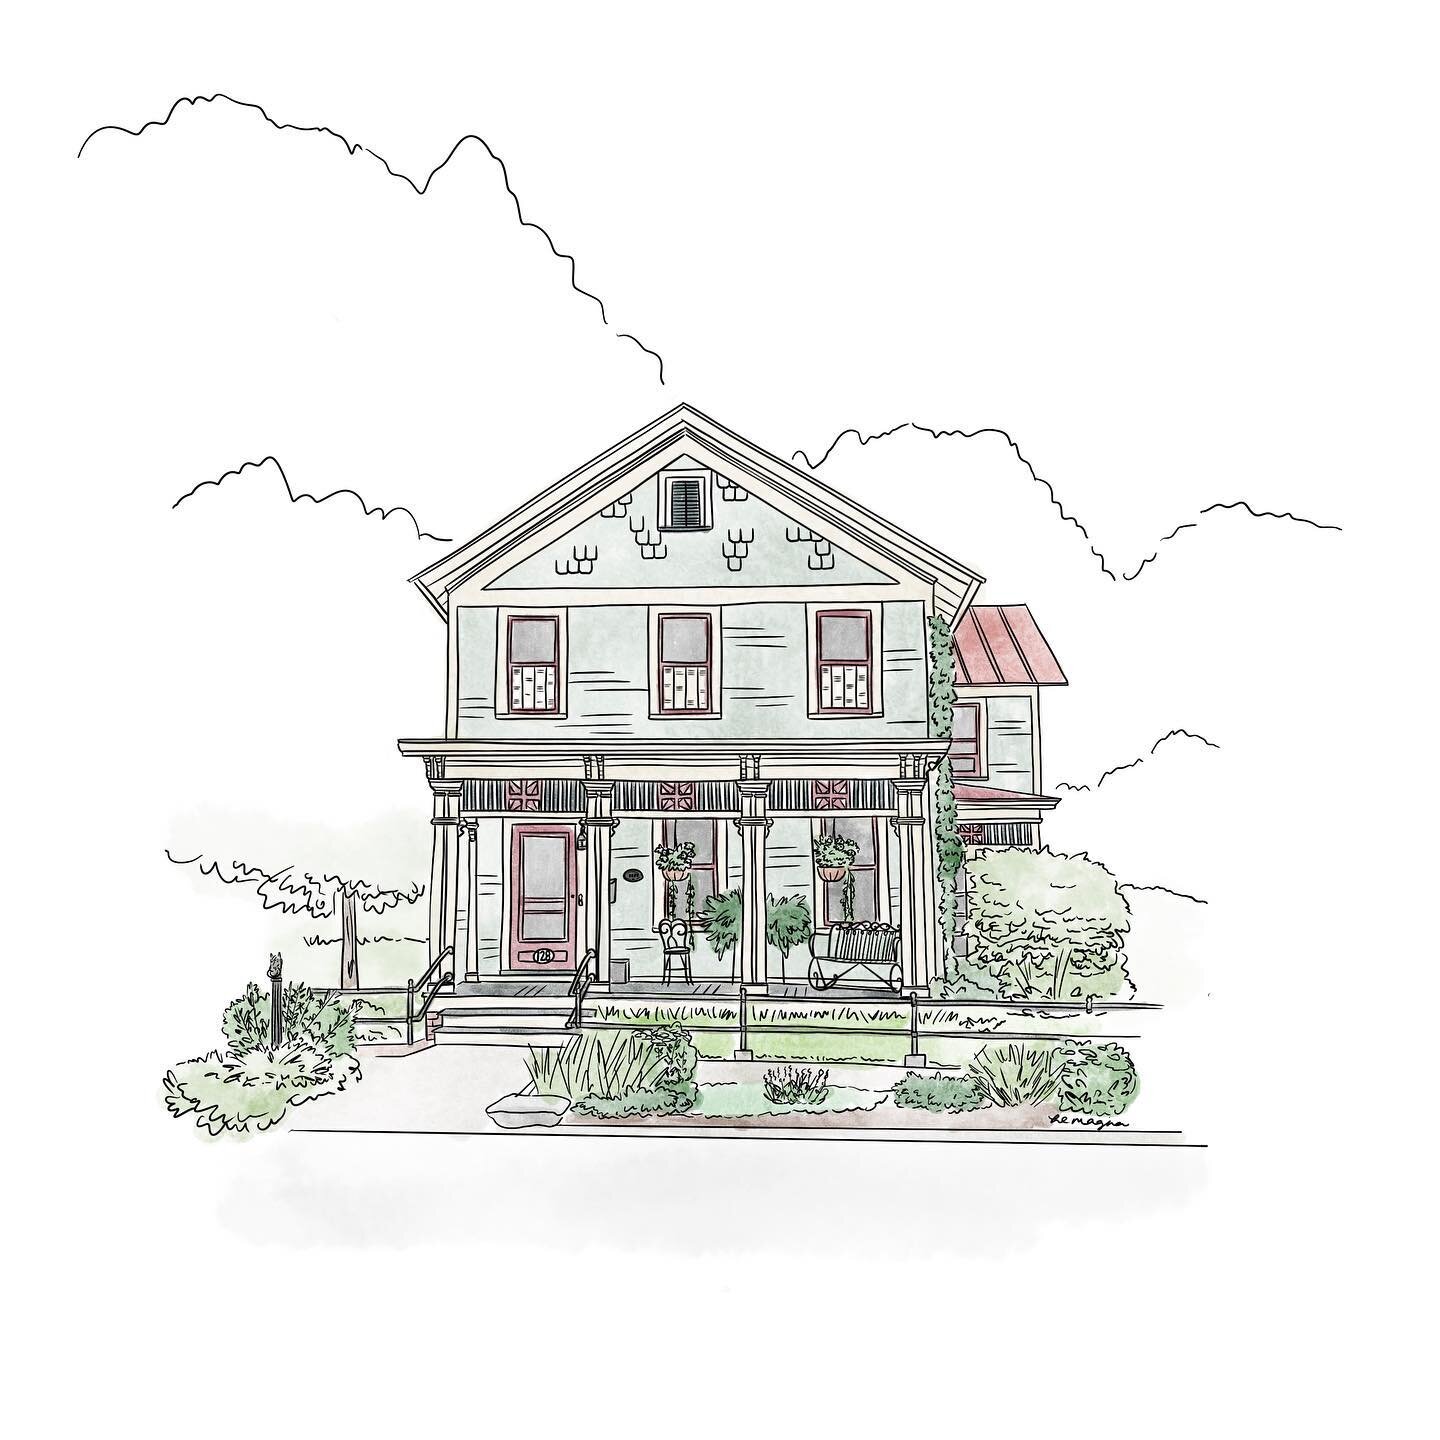 Finally finished the doodle of this gorgeous home! It was originally built in 1886 and the amount of detail and craftsmanship is incredible. I love being able to walk by it every day to admire its beauty.